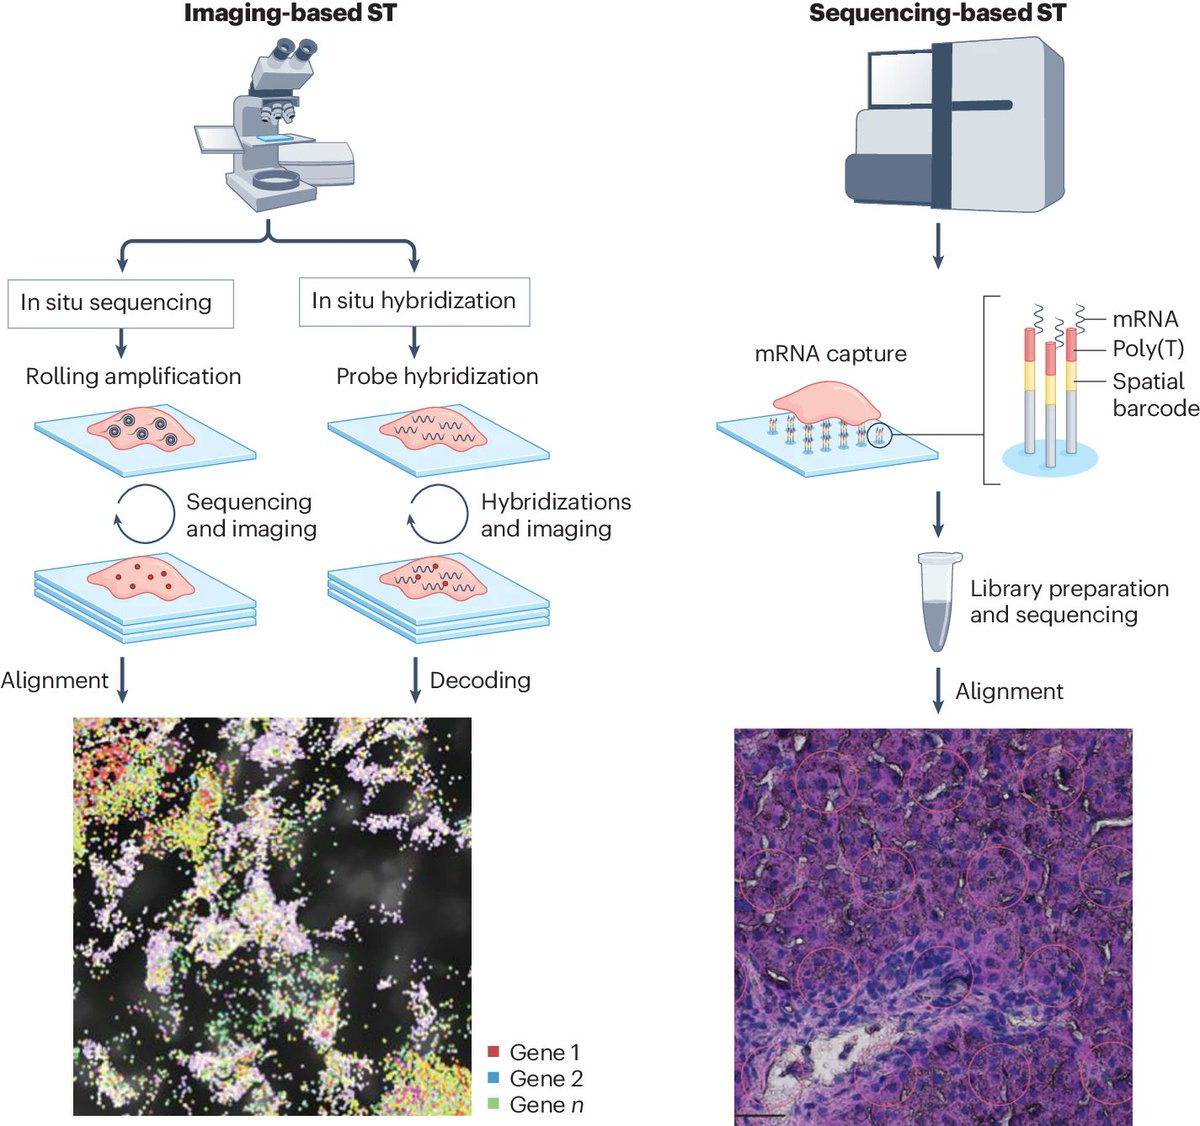 This REVIEW discusses knowledge of #MASLD development and progression and how the burgeoning field of #spatialgenomics is driving exciting new developments in our understanding of human liver disease pathogenesis and therapeutic target identification nature.com/articles/s4157…